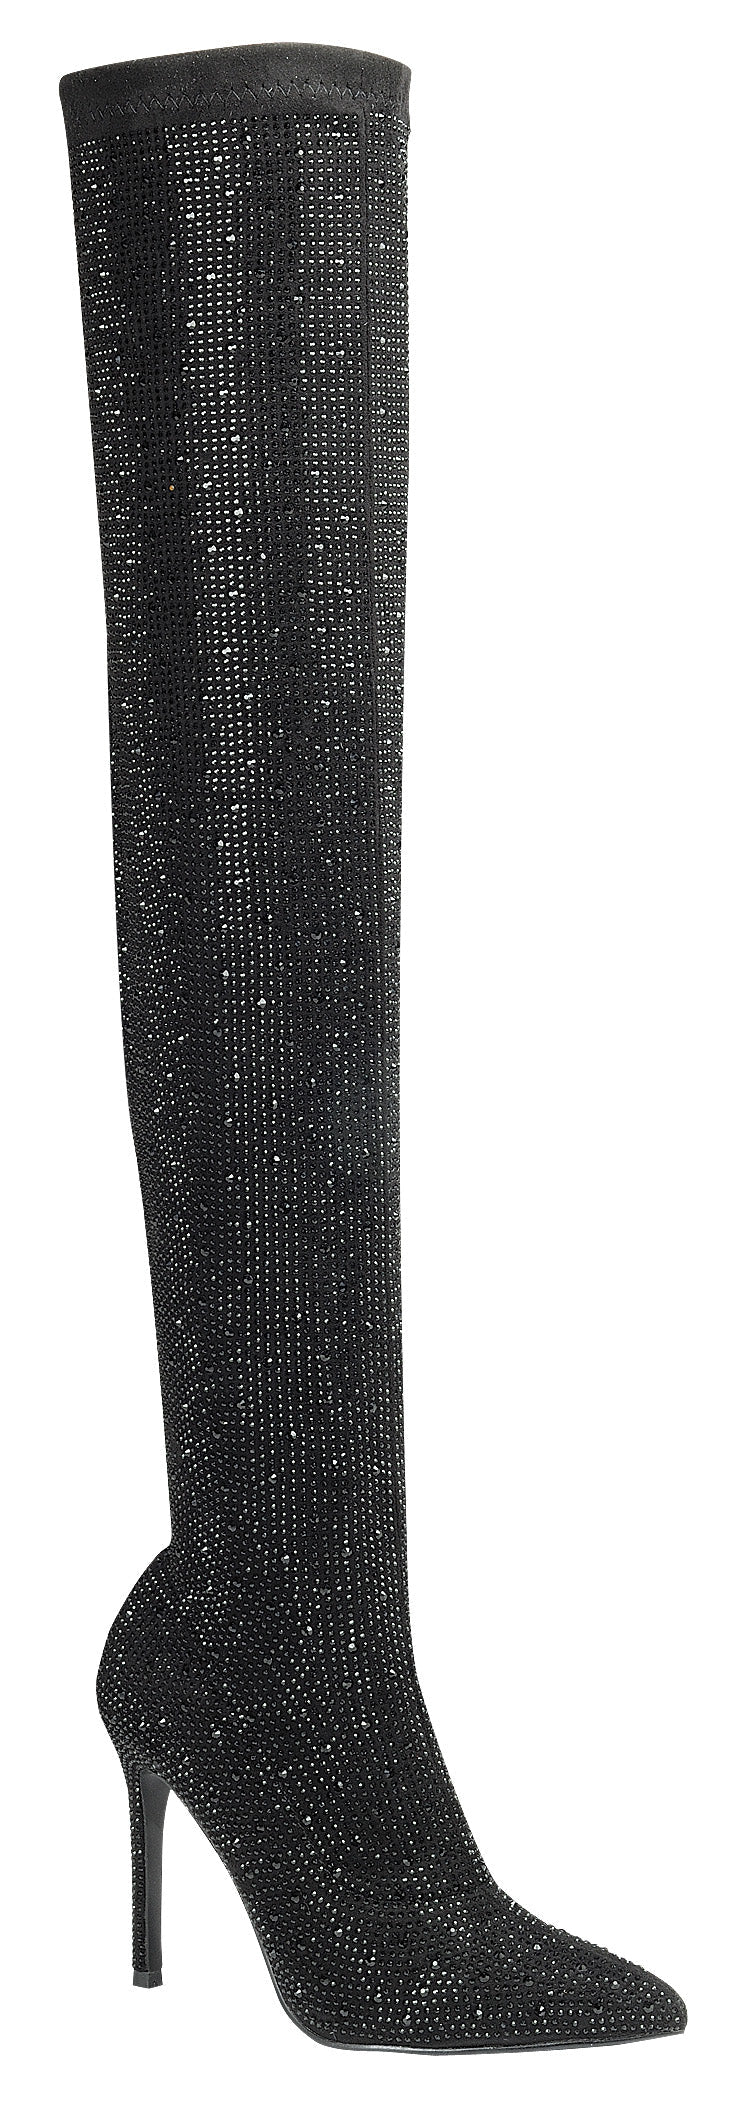 Rhinestone Over The Knee Boots Ensure-18 | Shoe Time